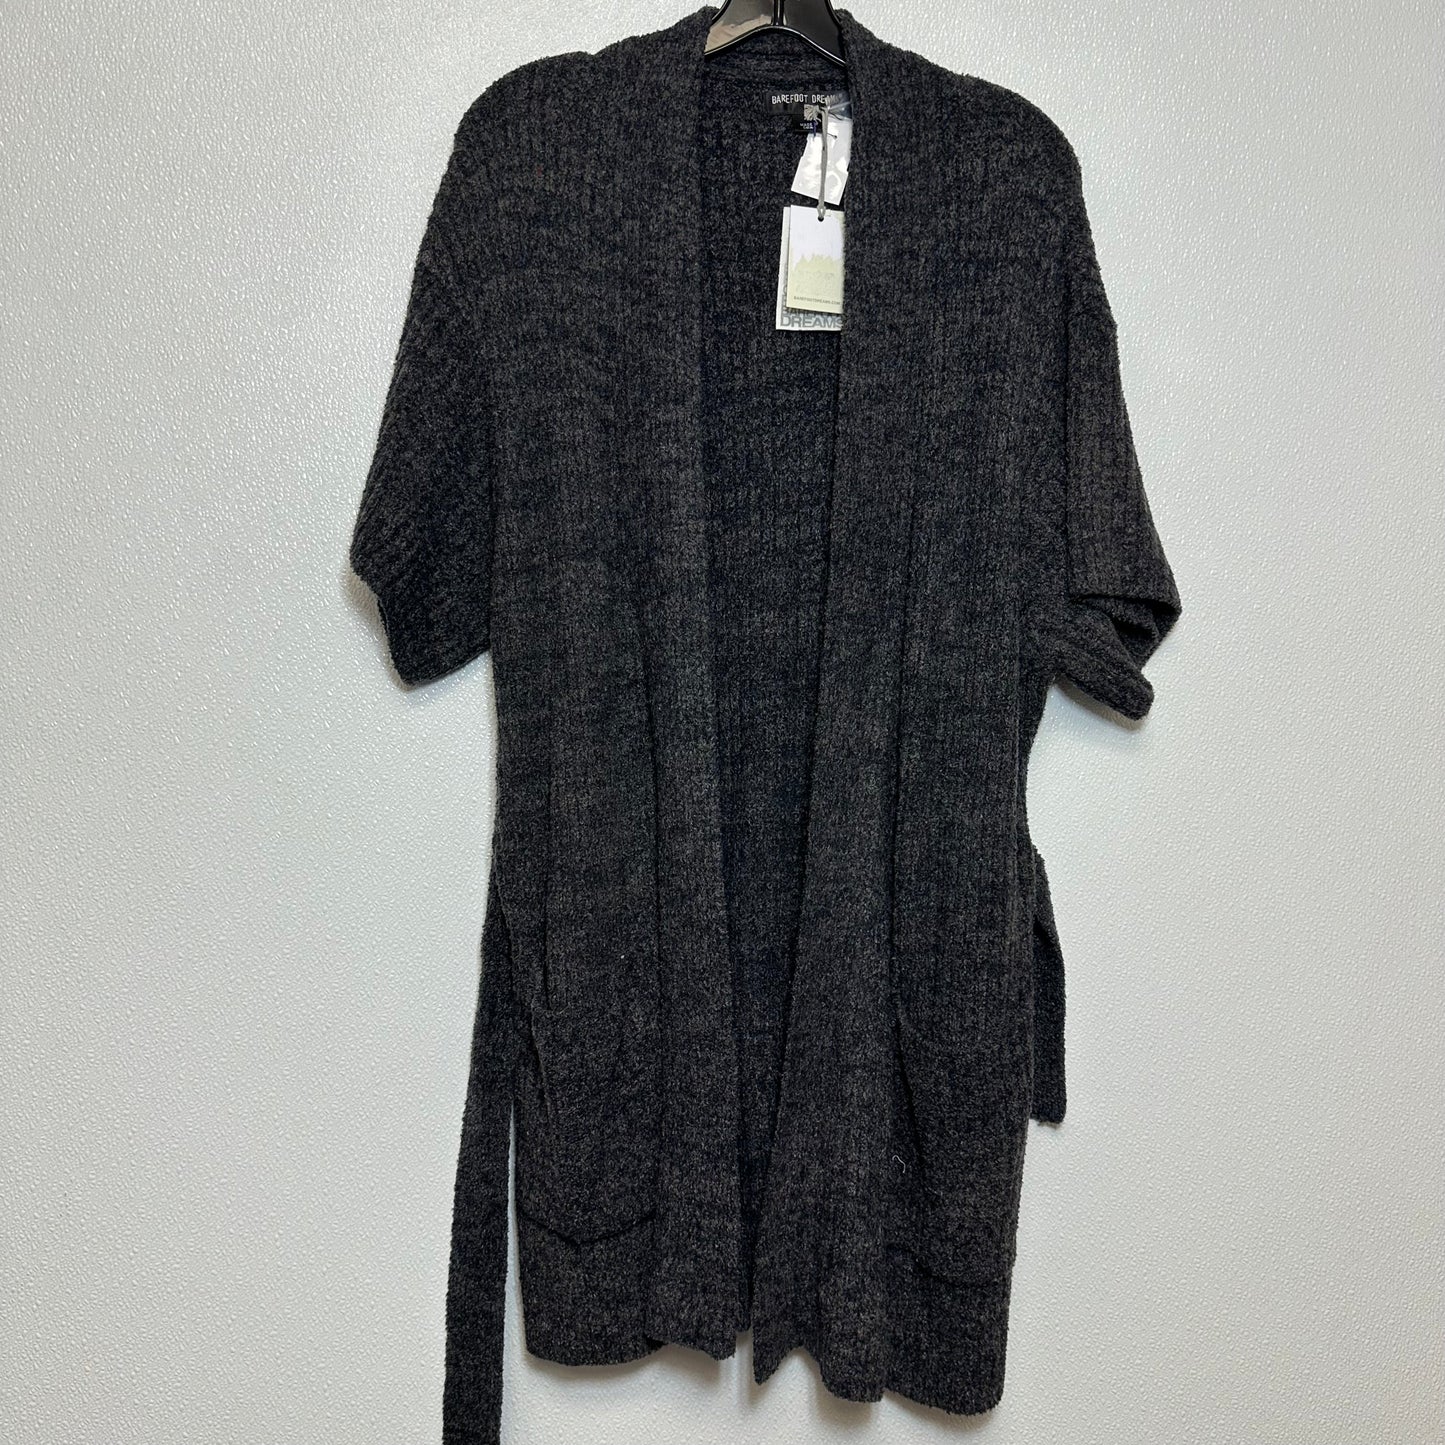 Cardigan By Barefoot Dreams  Size: S